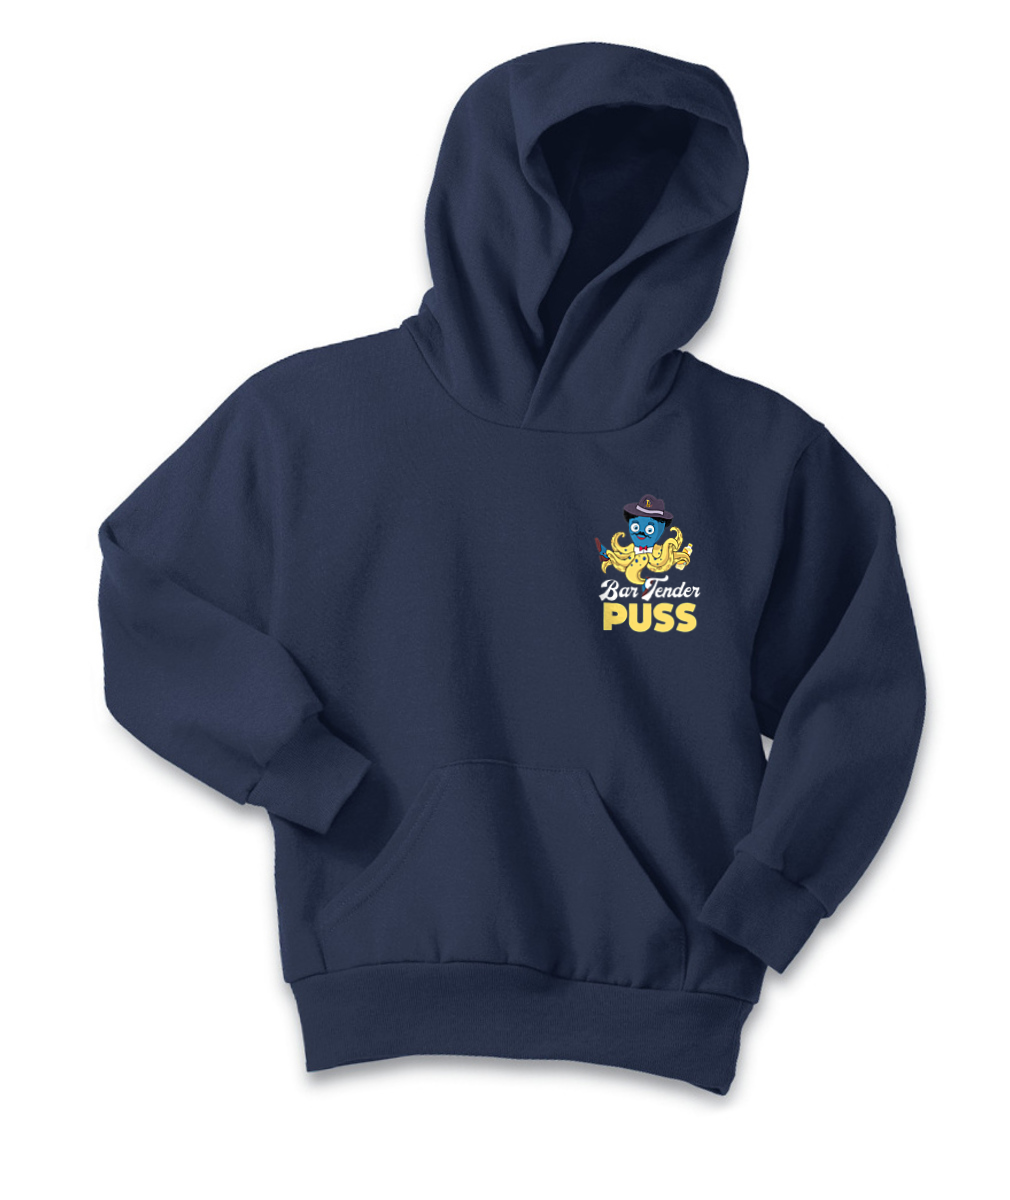 BarTender Puss Kids' Core Fleece Pullover Embroidered Hooded Sweatshirt or Similar